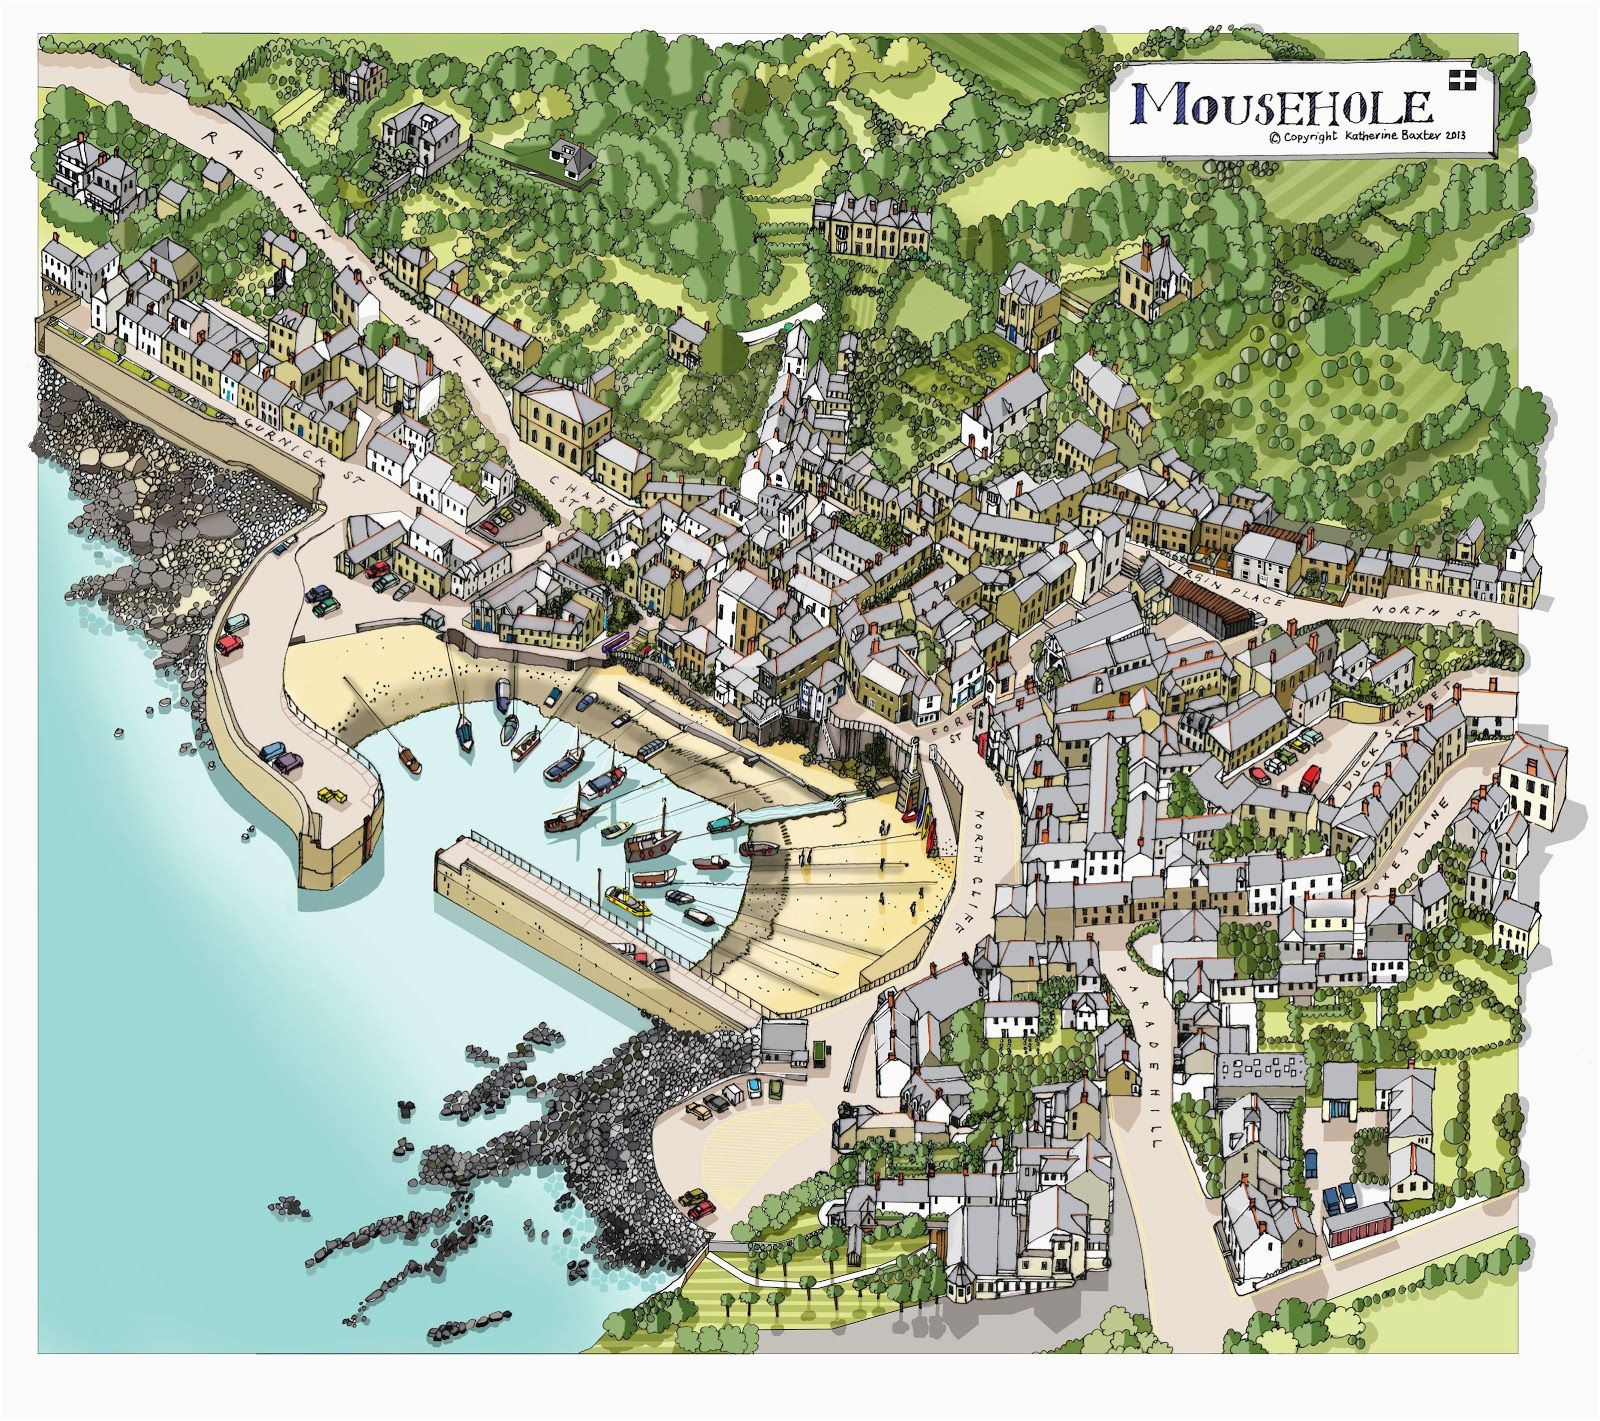 pictorial map of mousehole a small cornish town with a